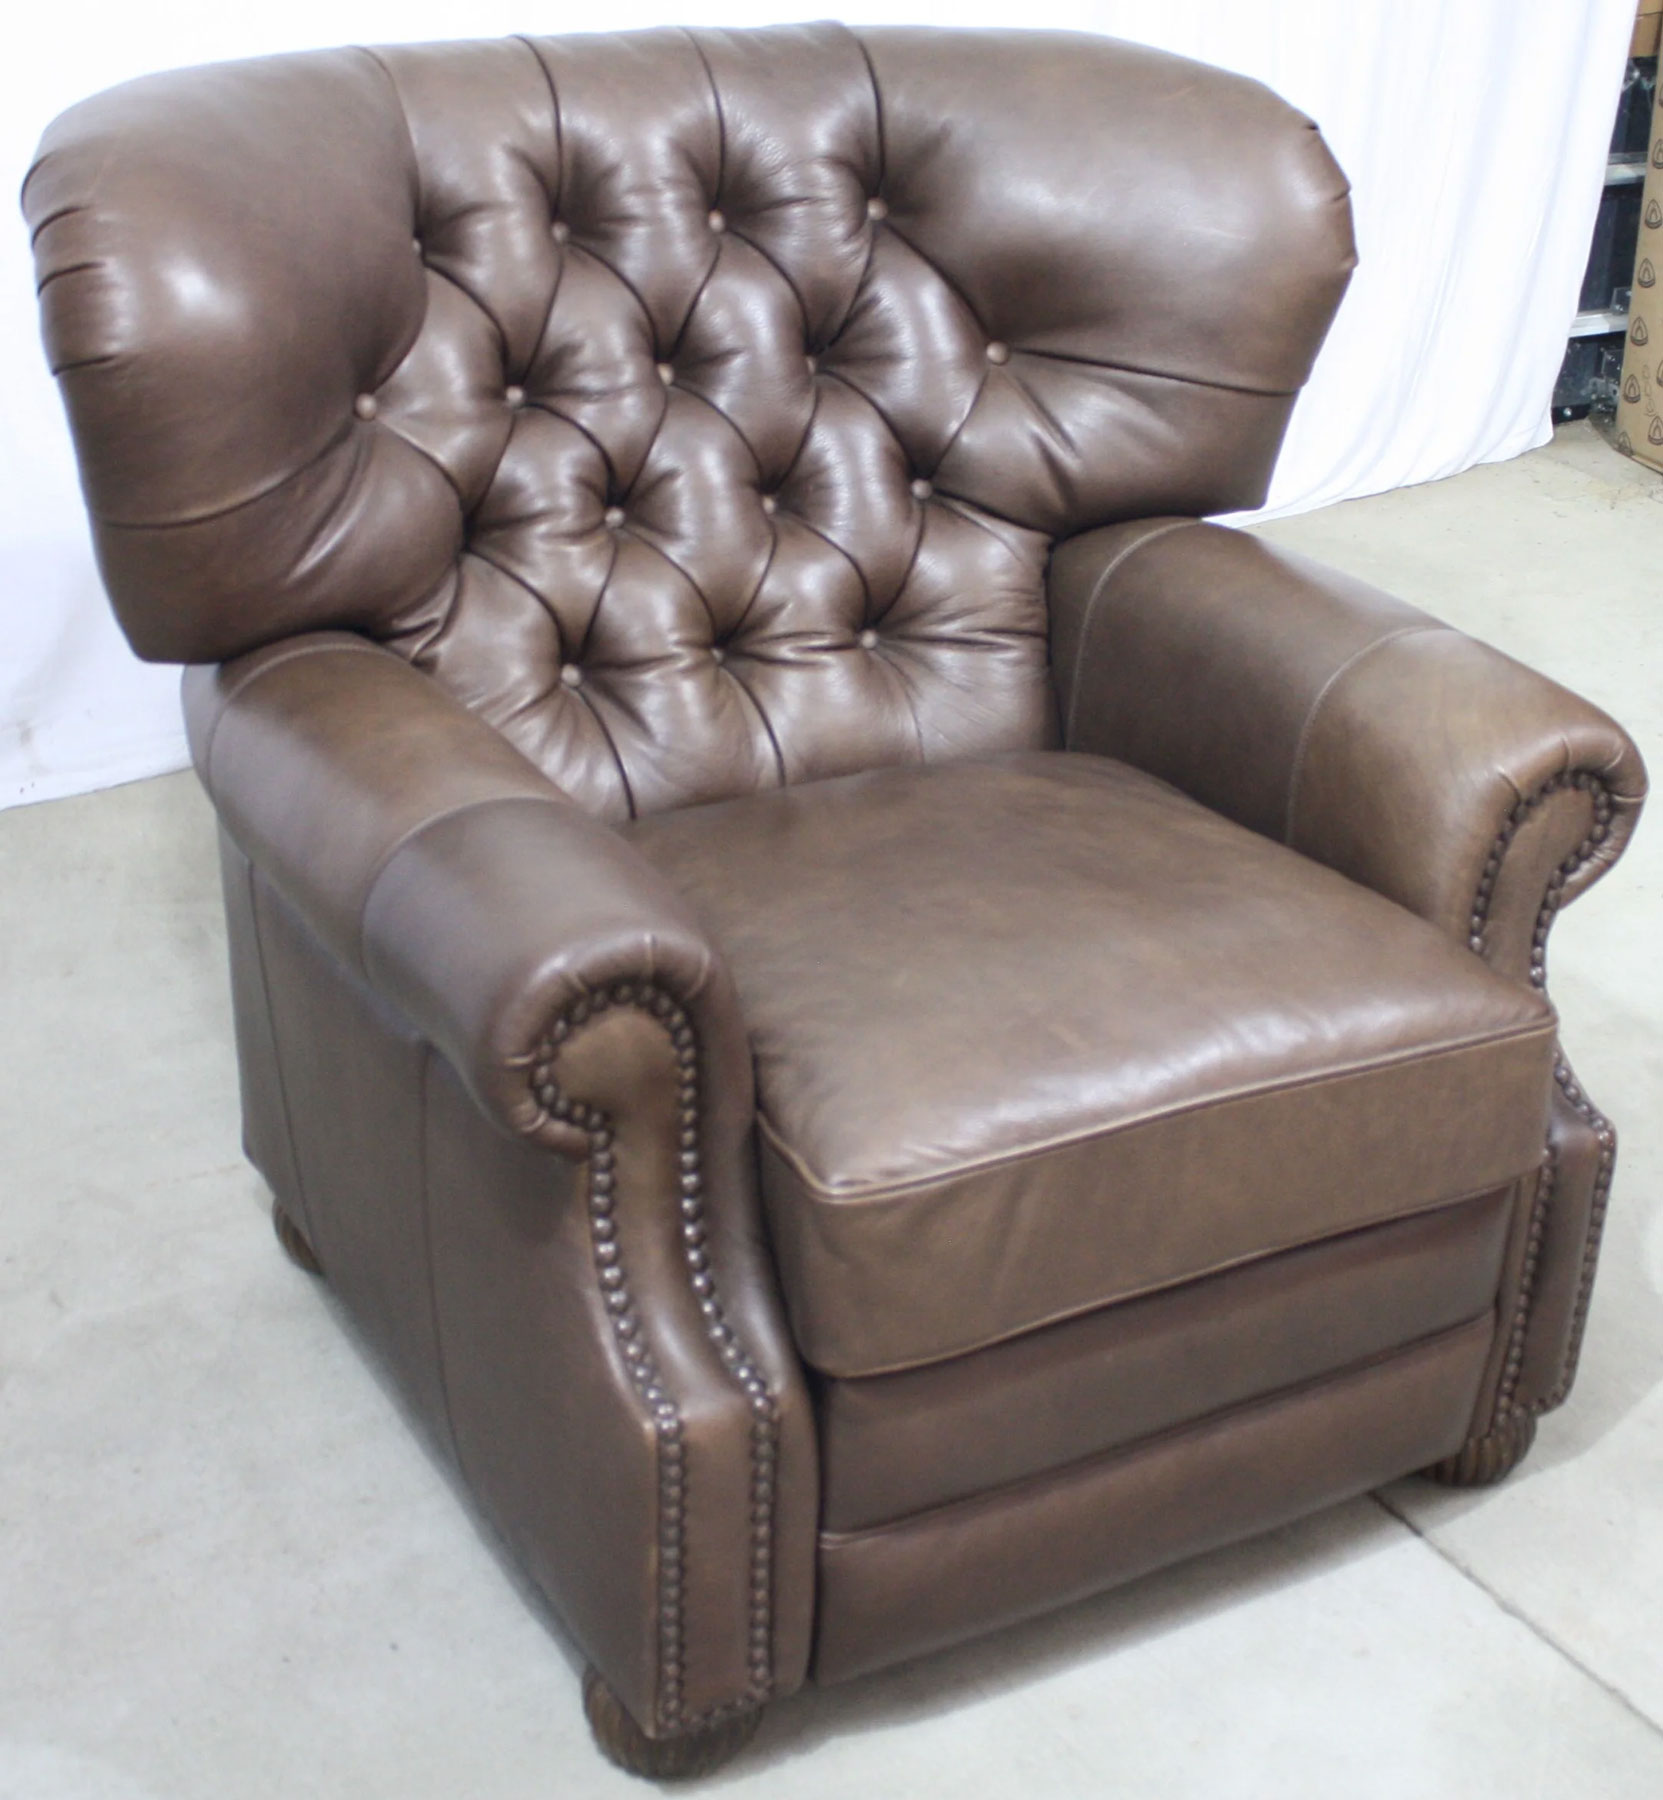 CC Leather Augusta 200R  Power Recliner in Harness Chocolate Leather